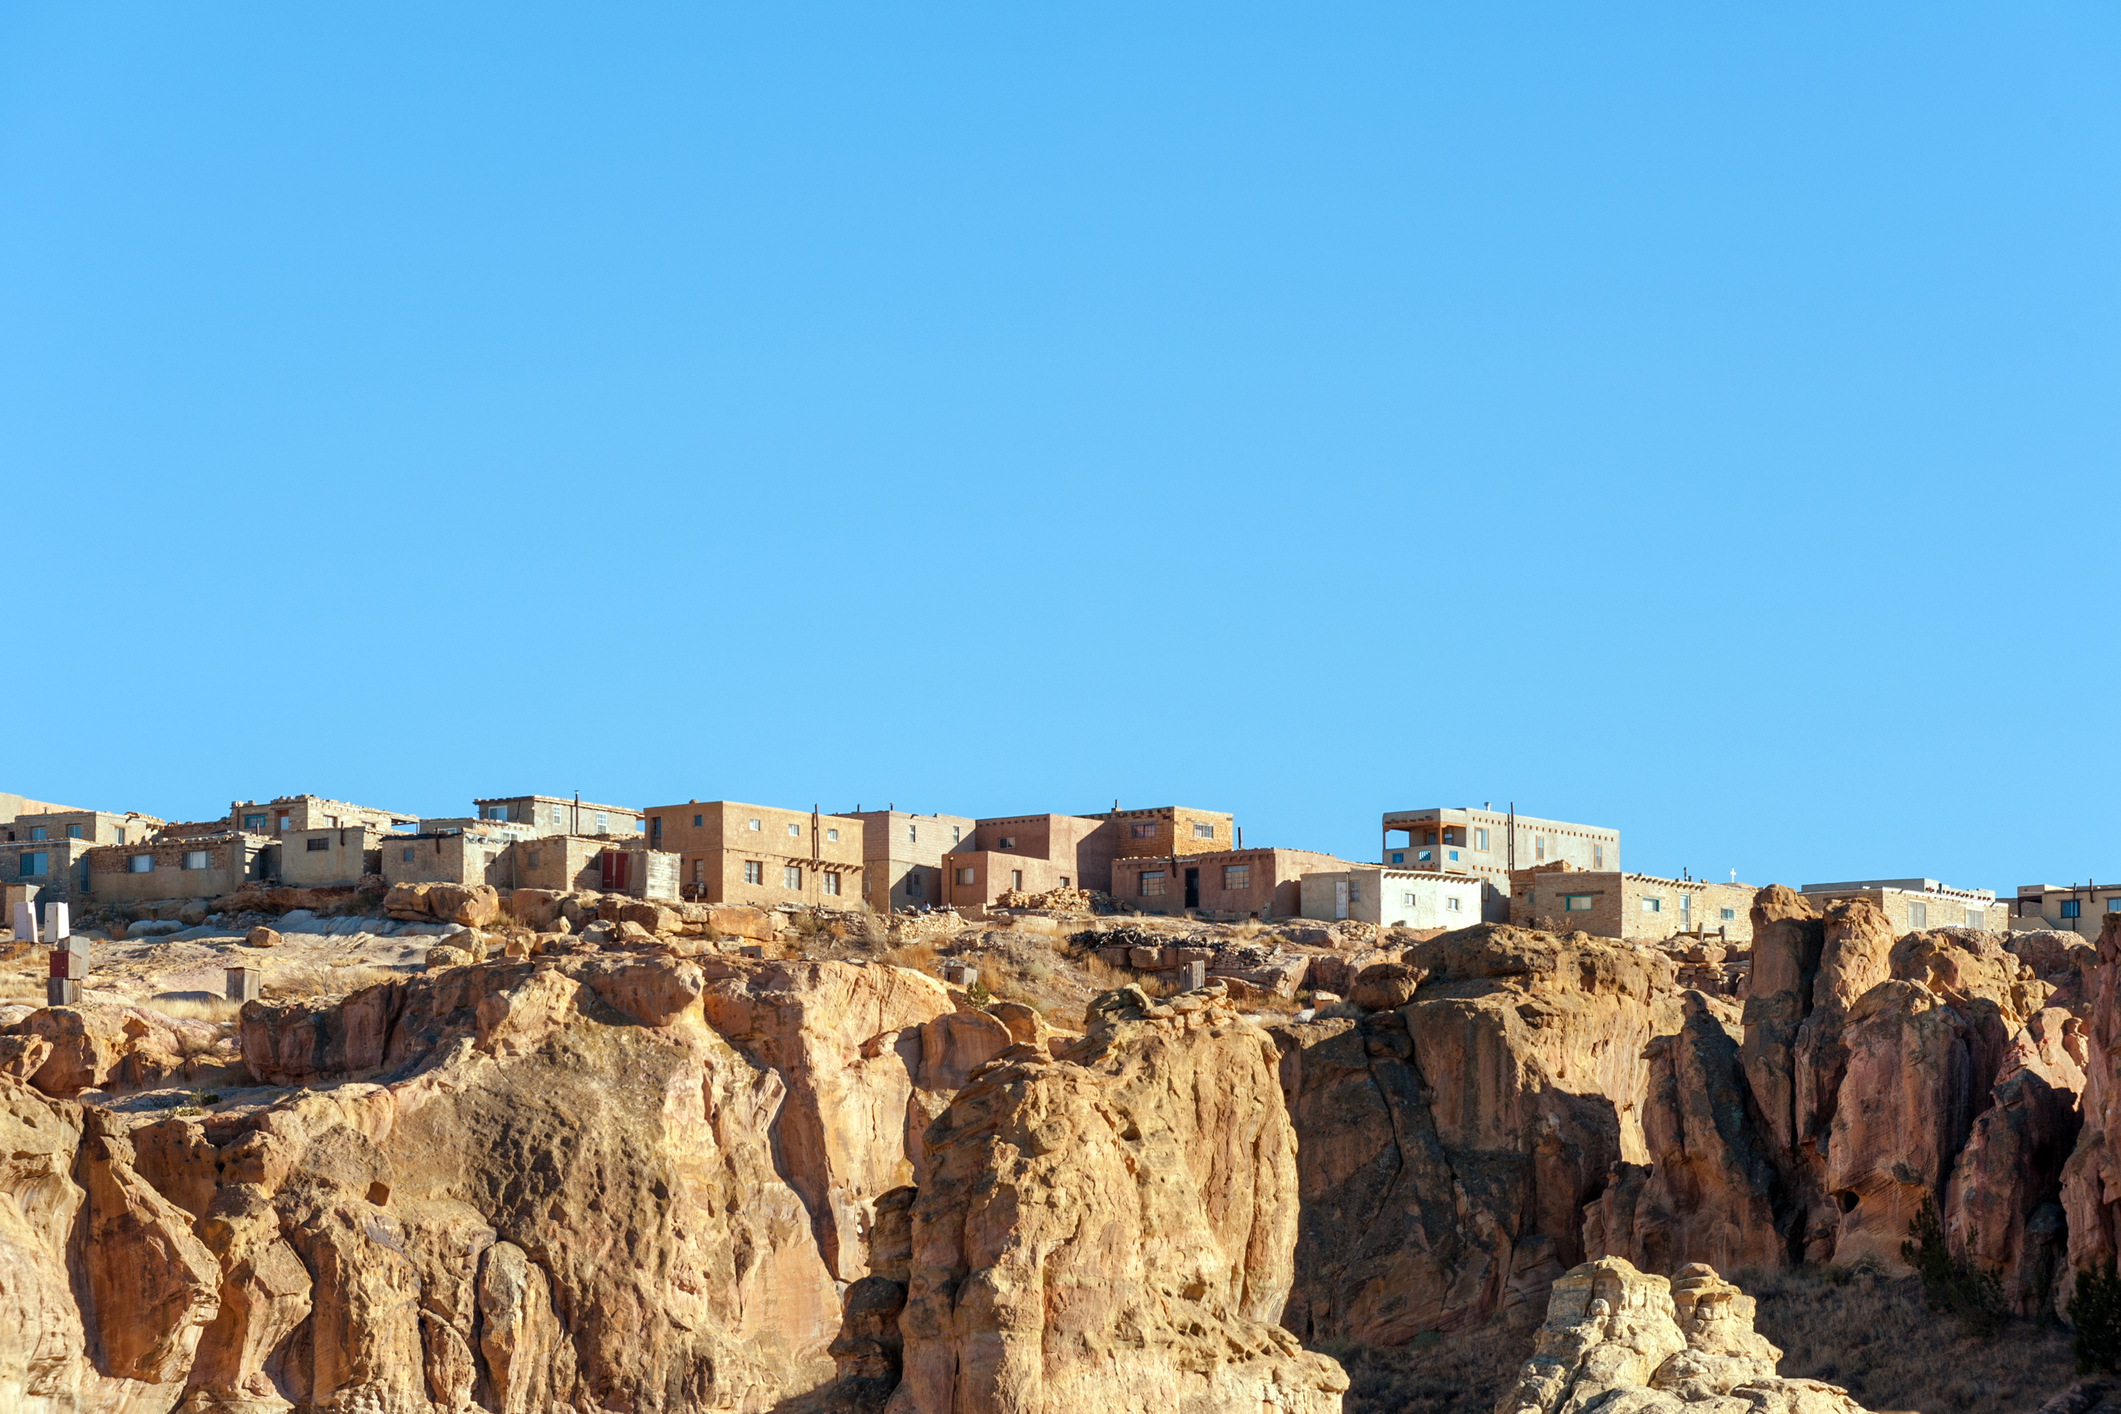 Adobe buildings perched atop a bluff.